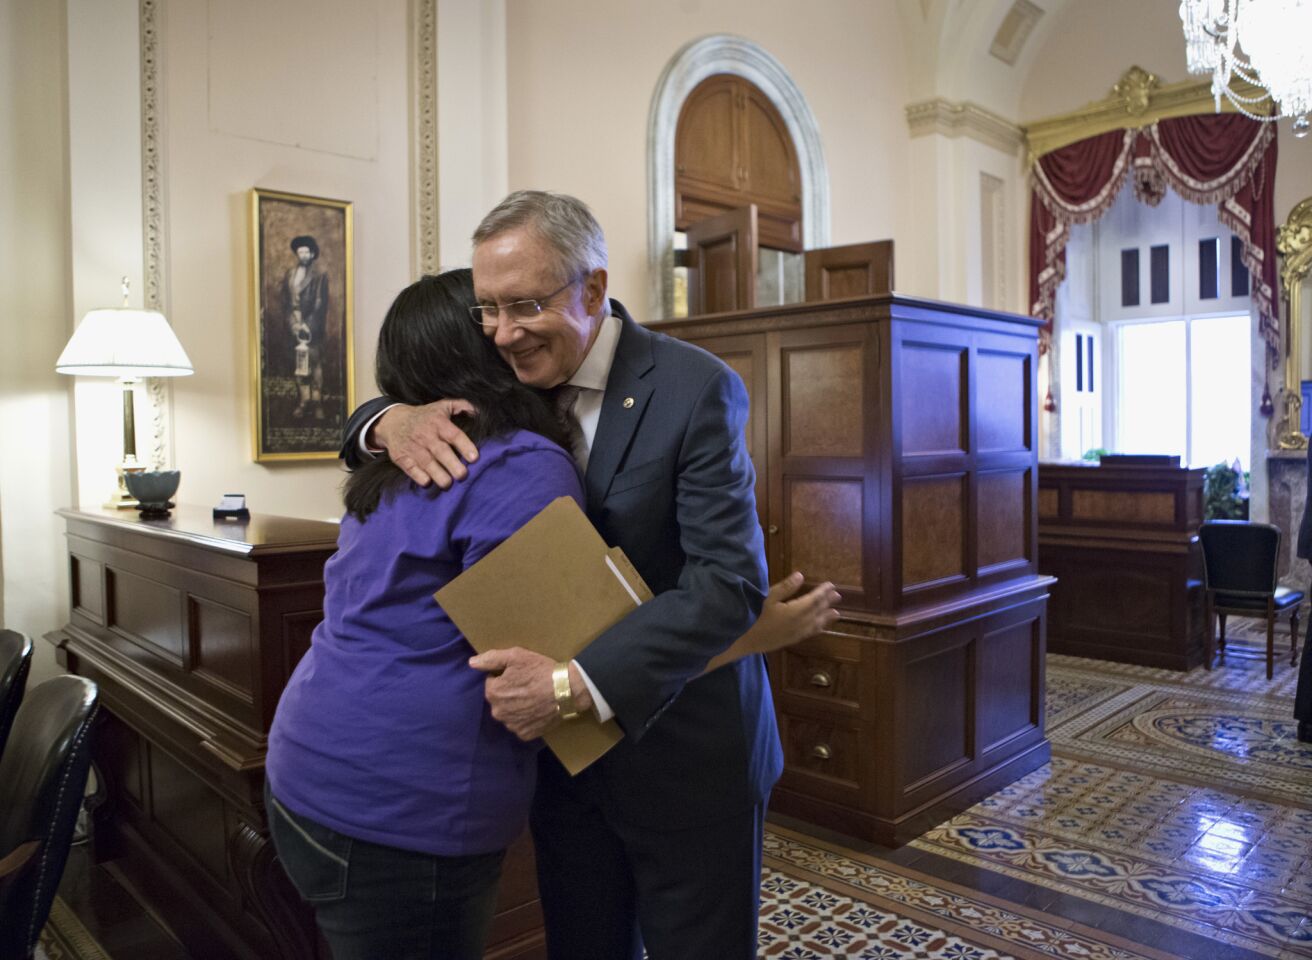 Senate Majority Leader Harry Reid (D-Nev.) embraces Astrid Silva of Las Vegas, a Dream Act supporter whose family came to the U.S. from Mexico illegally and whose story has been an inspiration for Reid during work on the immigration reform bill.